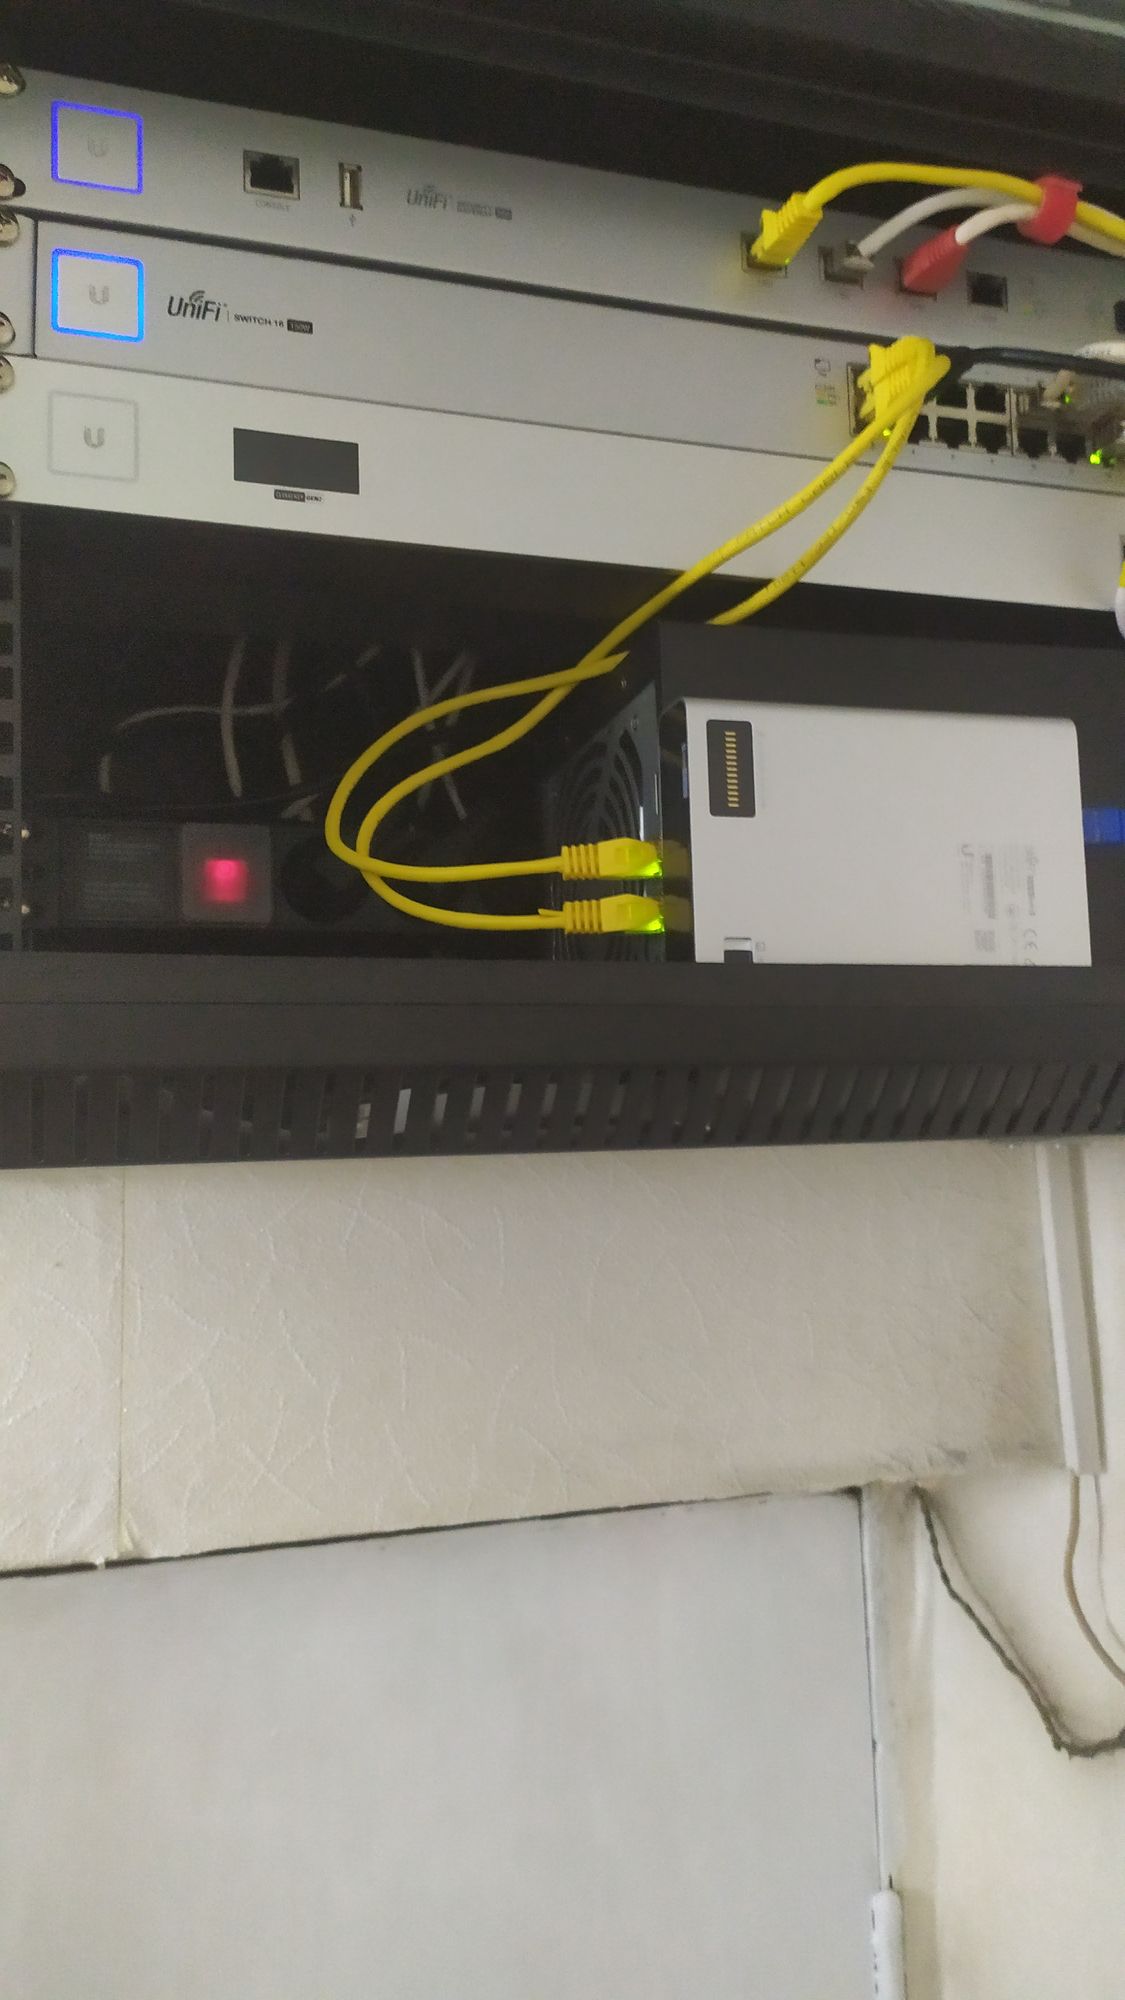 Cloud key gen2 and AP-Lite not powering on from US-8 60w switch. First time  I've set this all up, not sure if I need POE injectors or if theres  something I'm missing. 